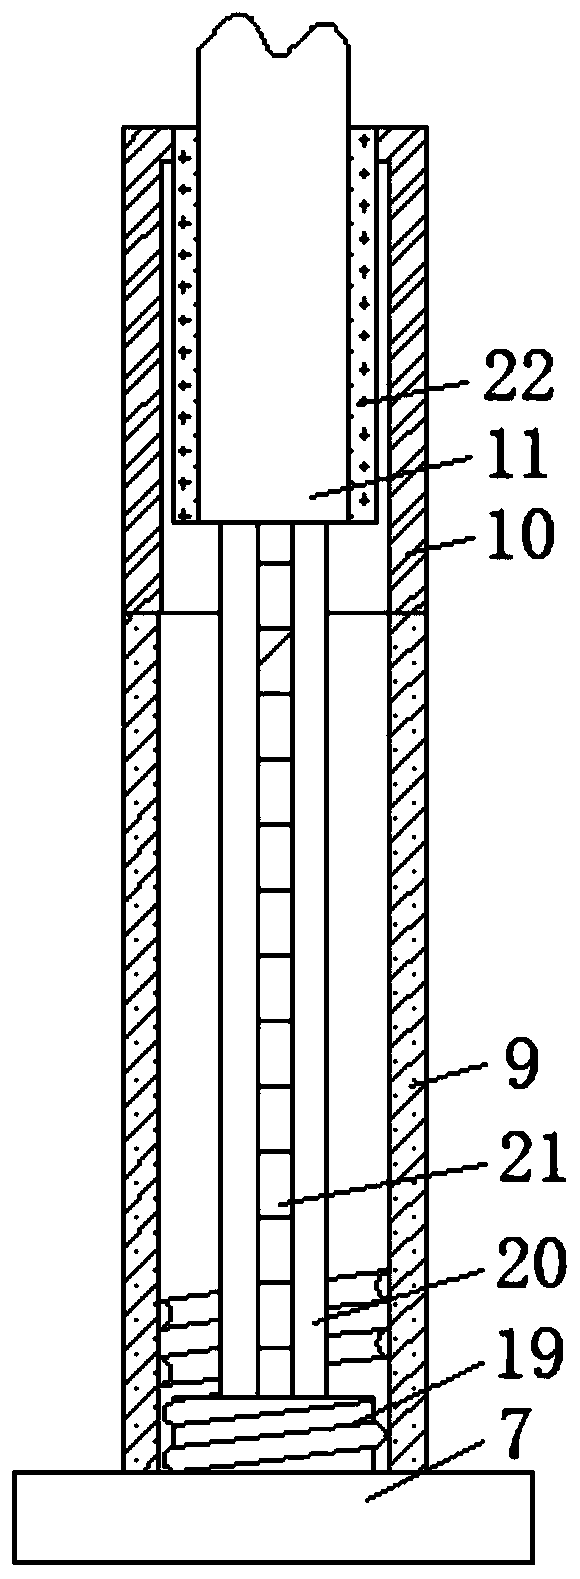 Novel stamping rod structure of coal compression machine